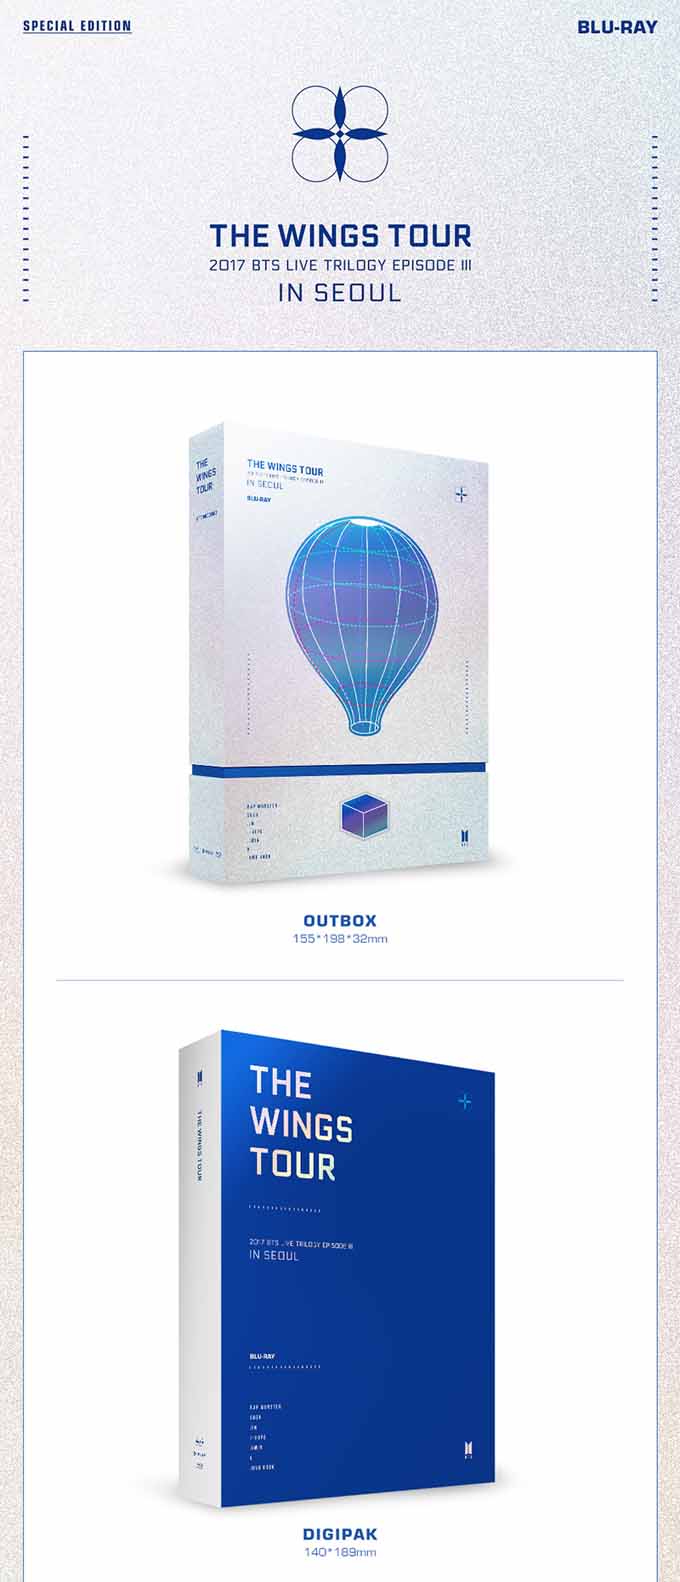 BTS WINGS TOUR  in Seoul  Blu-ray